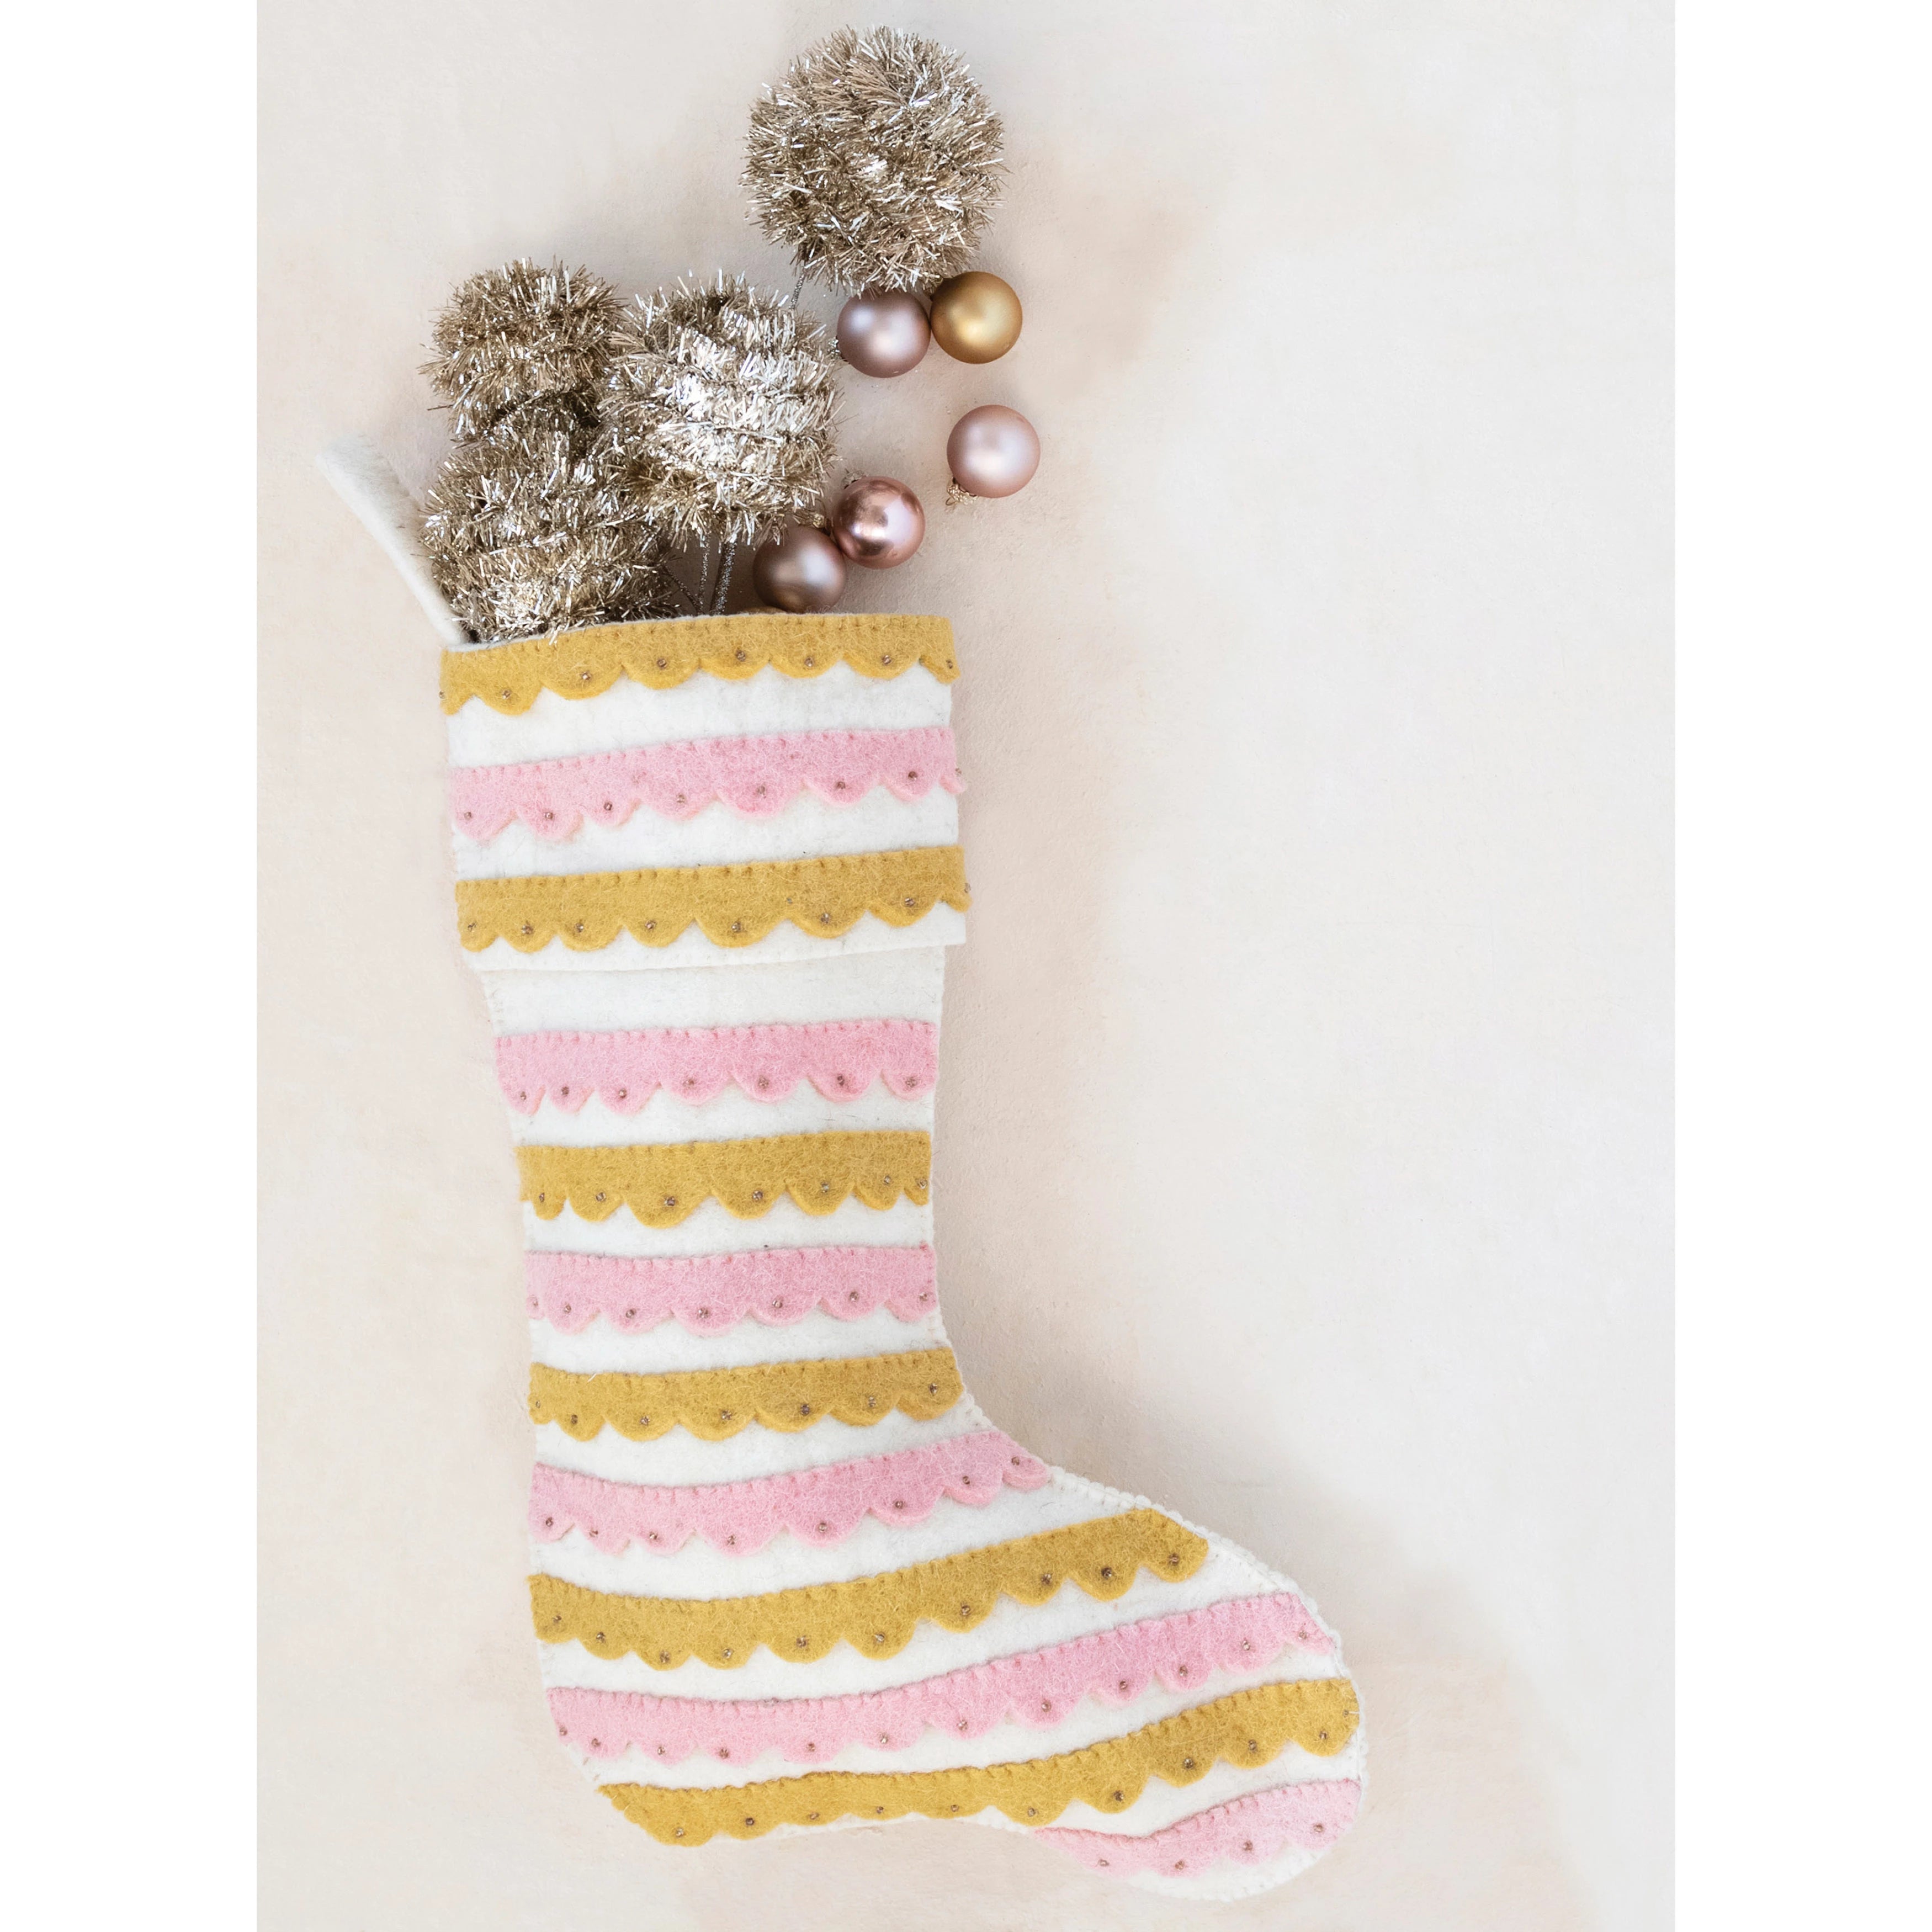 Appliqued Scallops and Beads Stocking - P I C N I C 